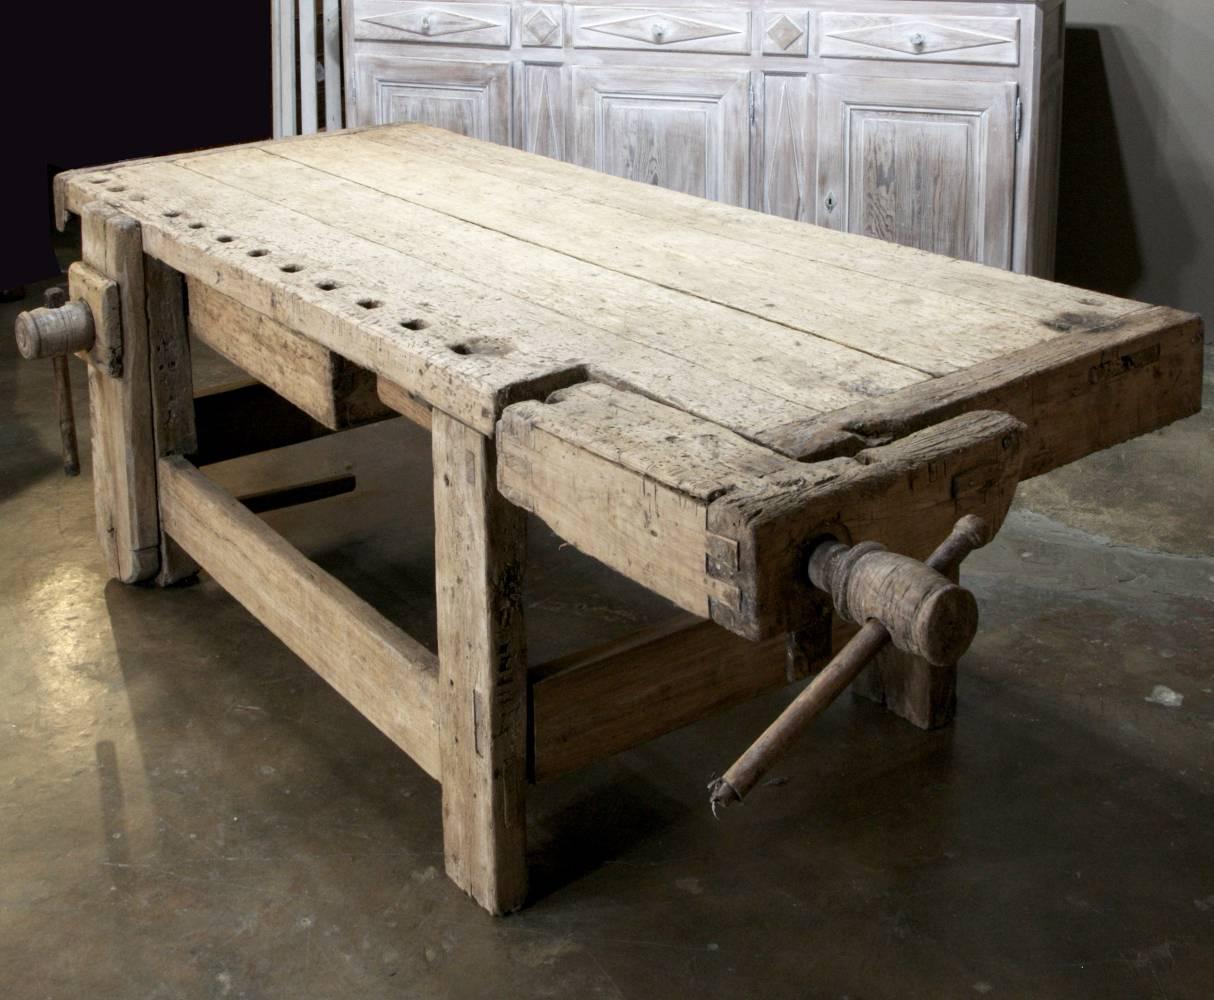 Handcrafted by the very artisans who were responsible for some of the timeless treasures that you see all around you in both of our huge showrooms, this 19th century rustic Country French workbench was built on a large-scale to handle large